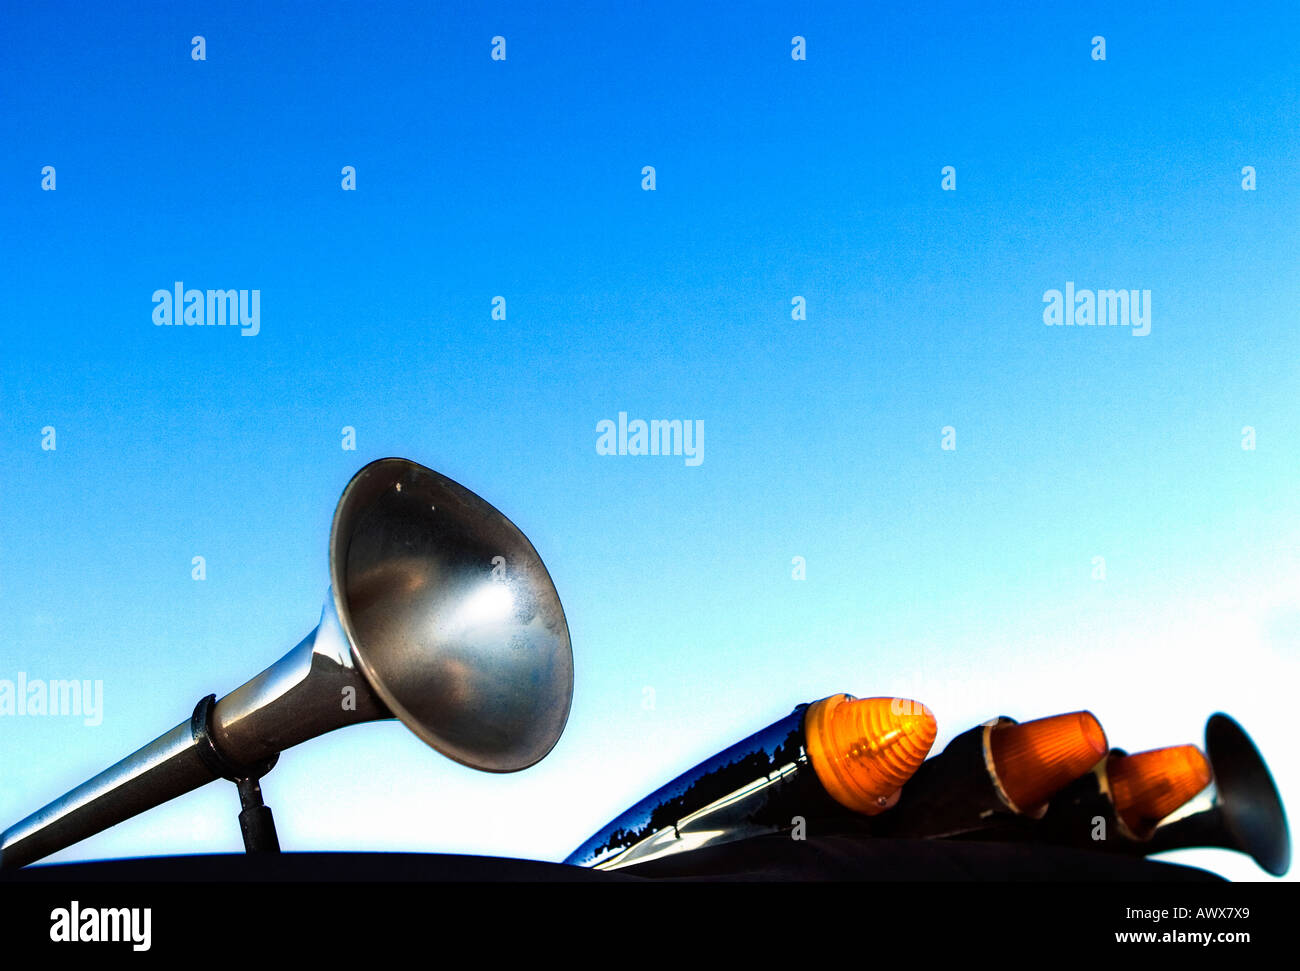 minimalism style image of horns and lights from the roof of a truck set against a blue cloudless sky Stock Photo